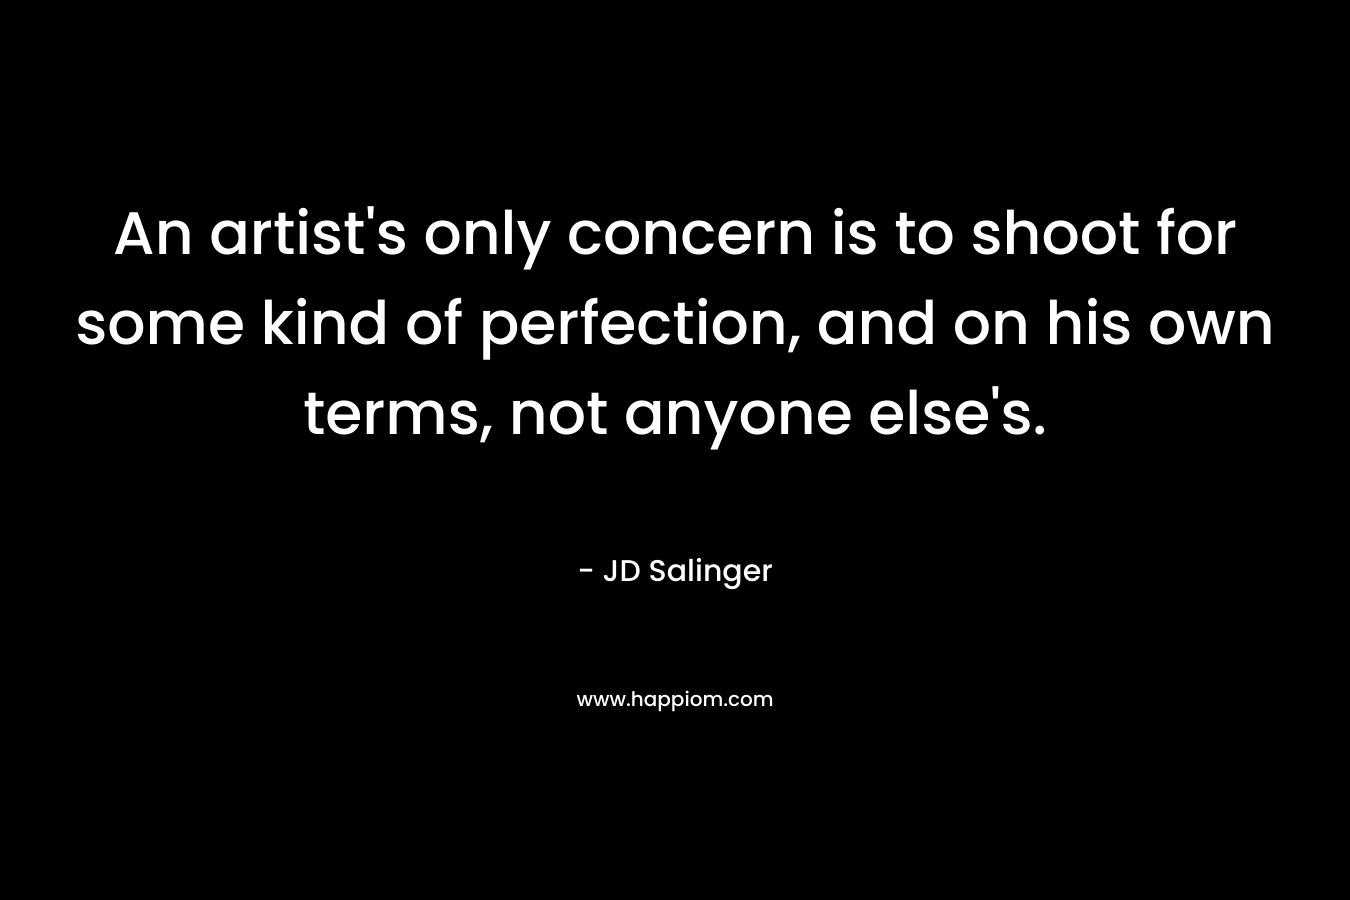 An artist’s only concern is to shoot for some kind of perfection, and on his own terms, not anyone else’s. – JD Salinger